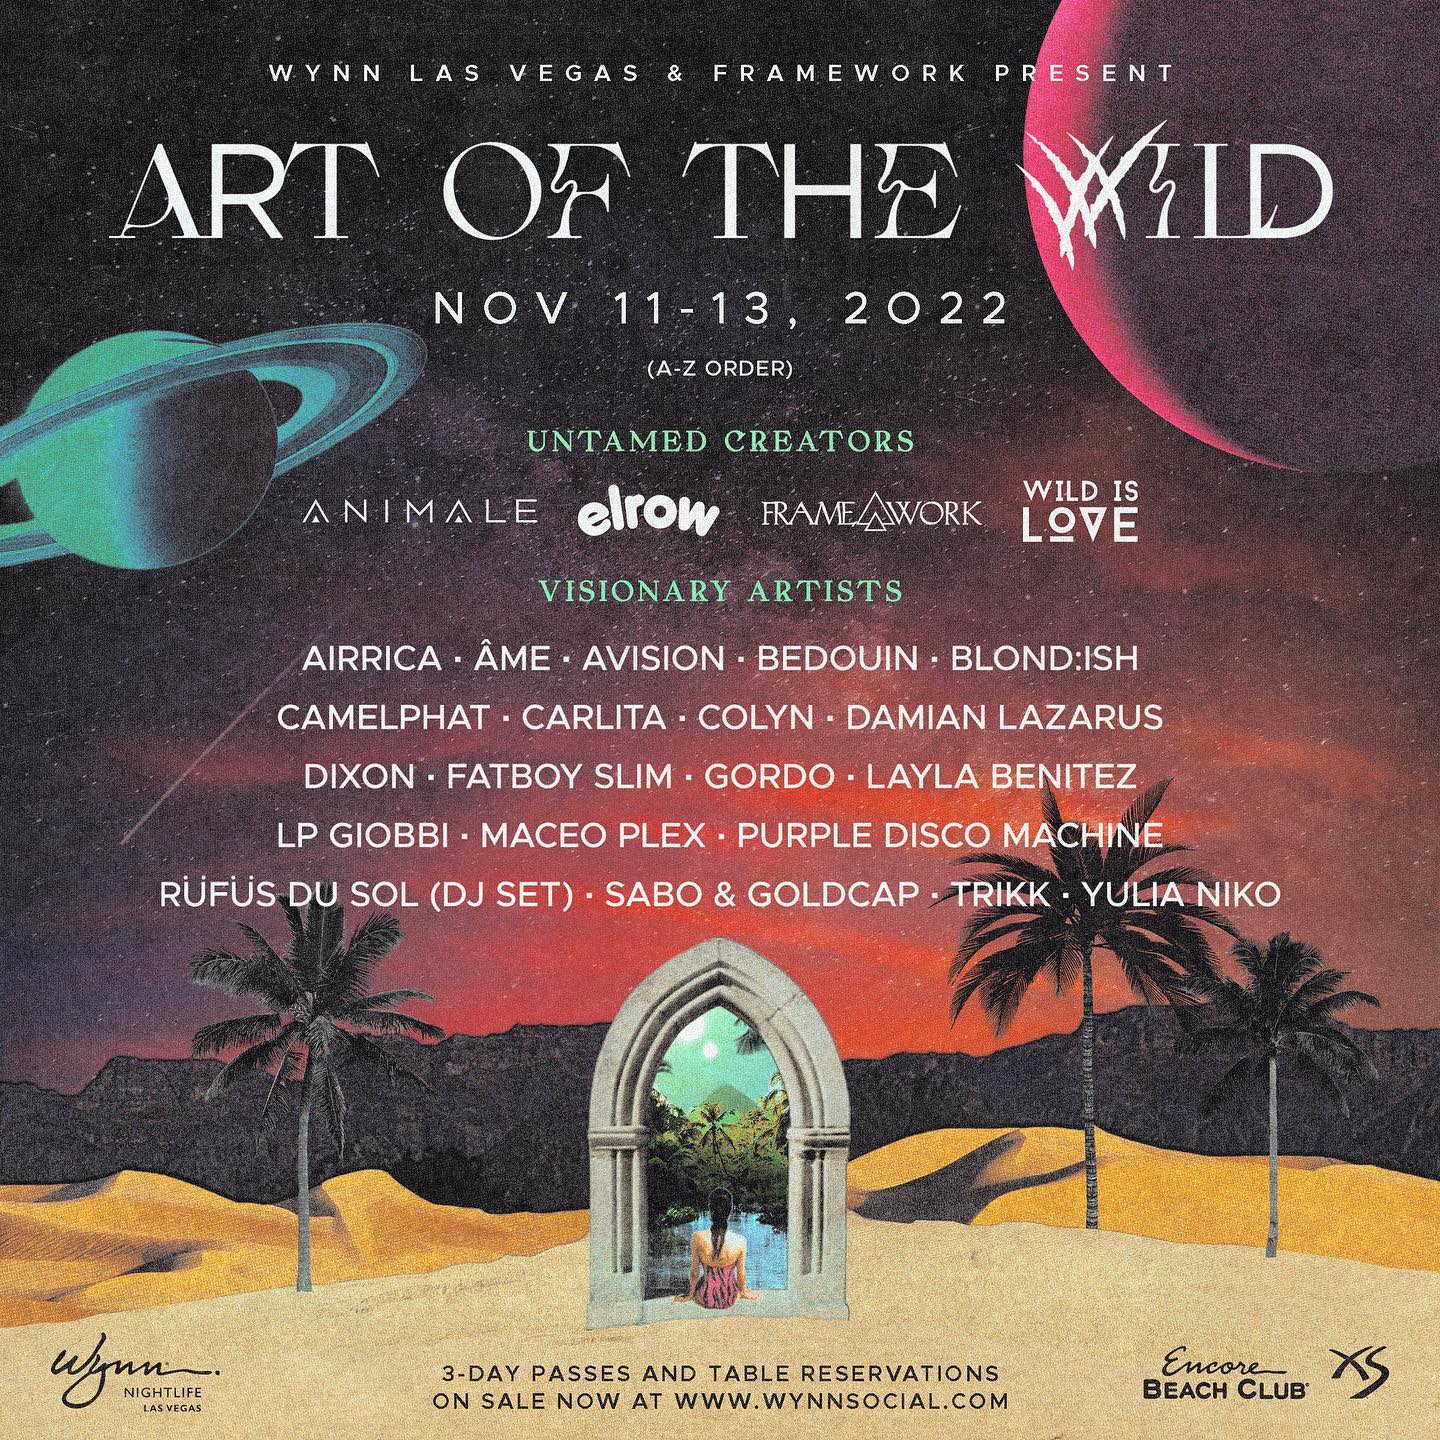 Gigs Image 1 for Art of the Wild, Las Vegas, US